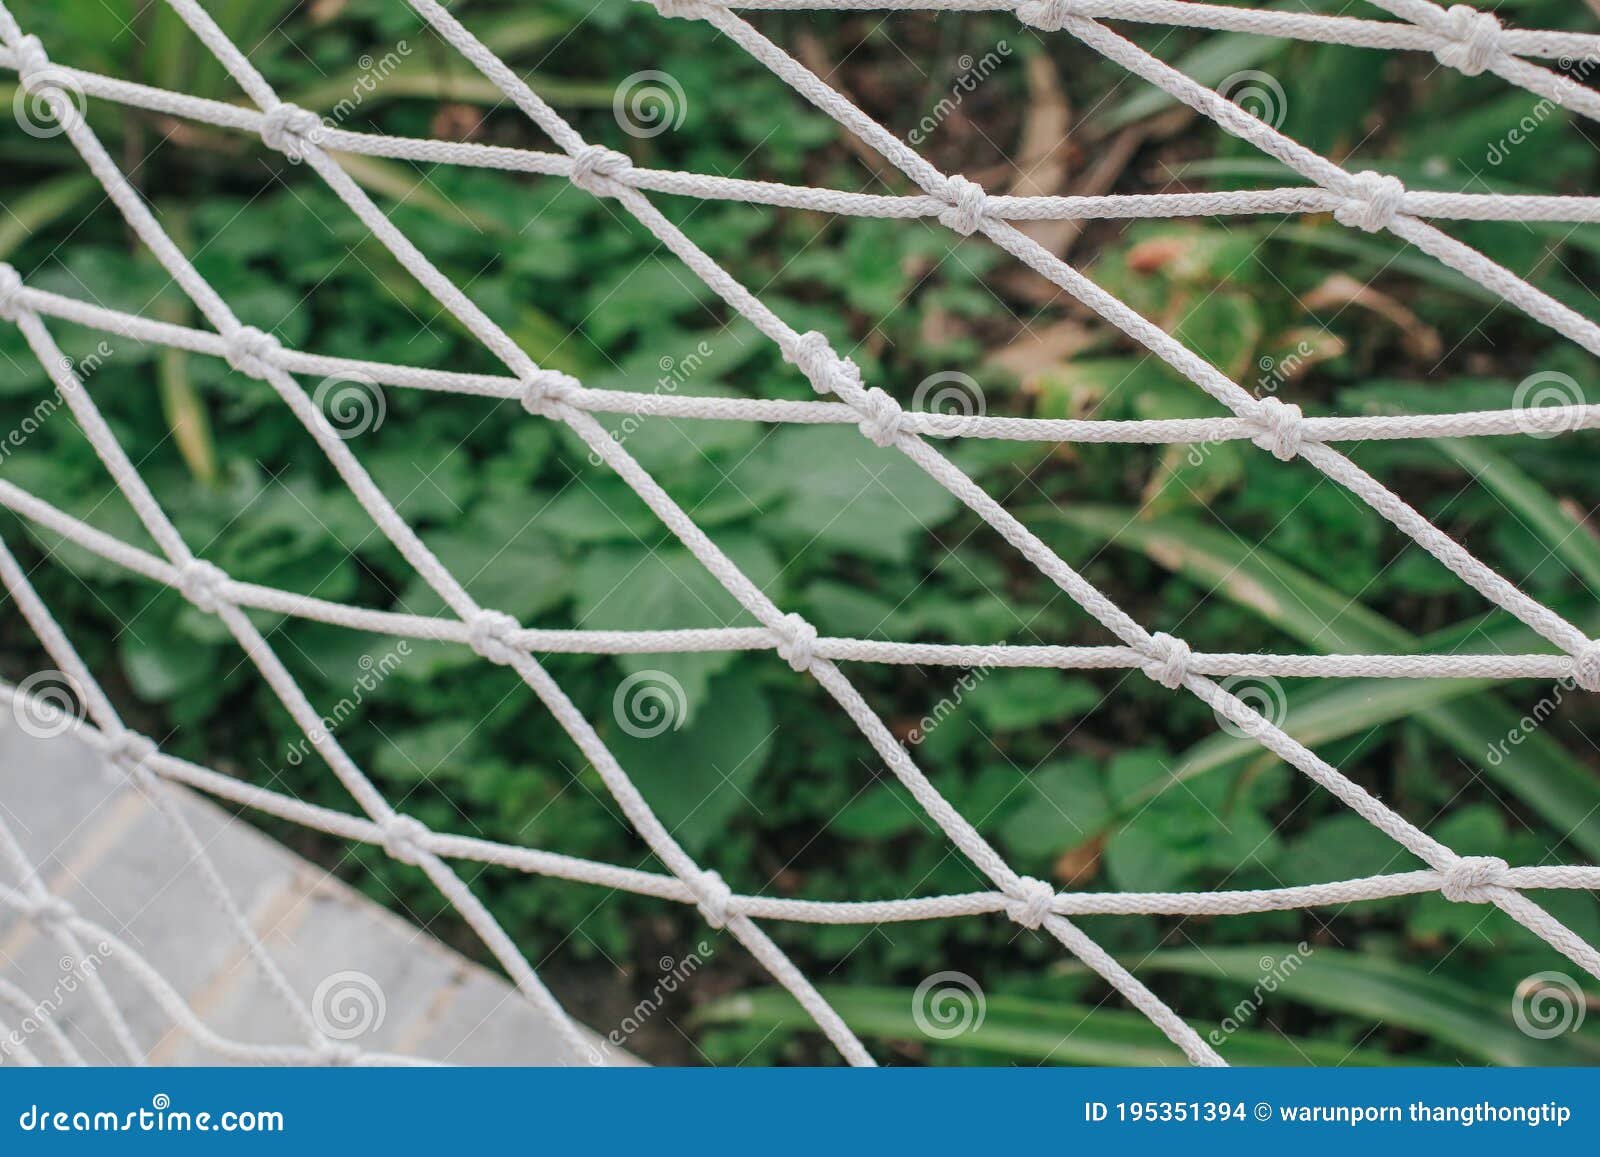 Seamless Nautical Rope Pattern Hammock is a Sling Made of Fabric, Rope, or  Netting Used for Swinging Stock Photo - Image of natural, closeup: 195351394